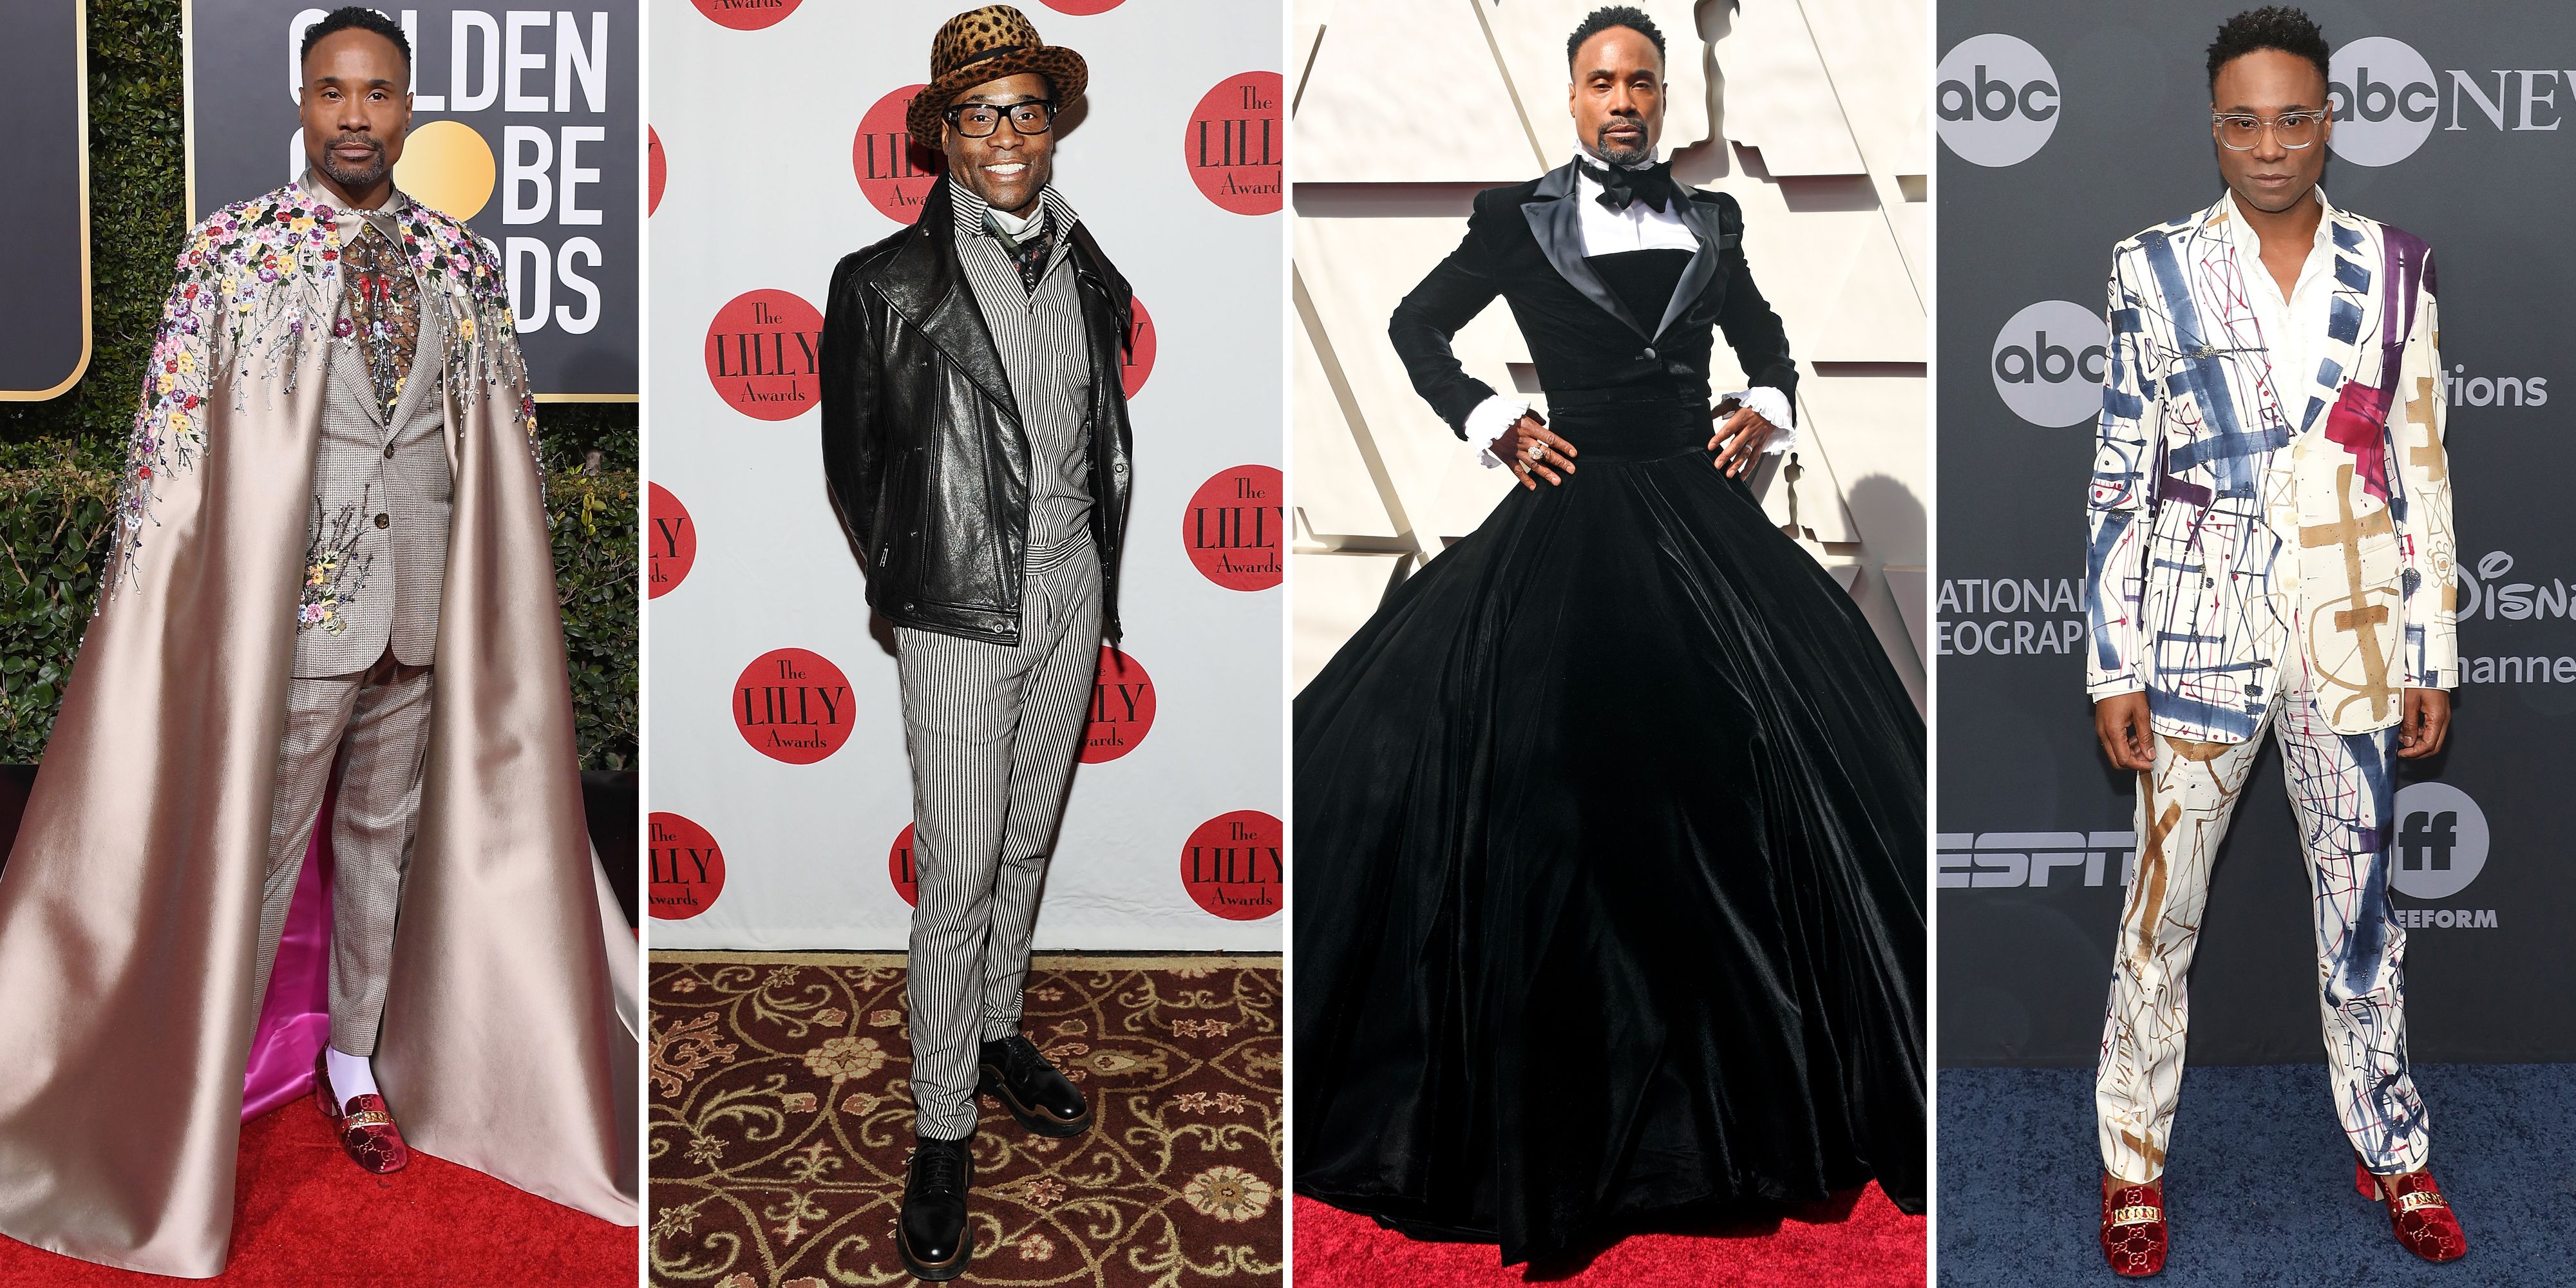 The 5 pieces we should all have in our wardrobe according to Billy Porter